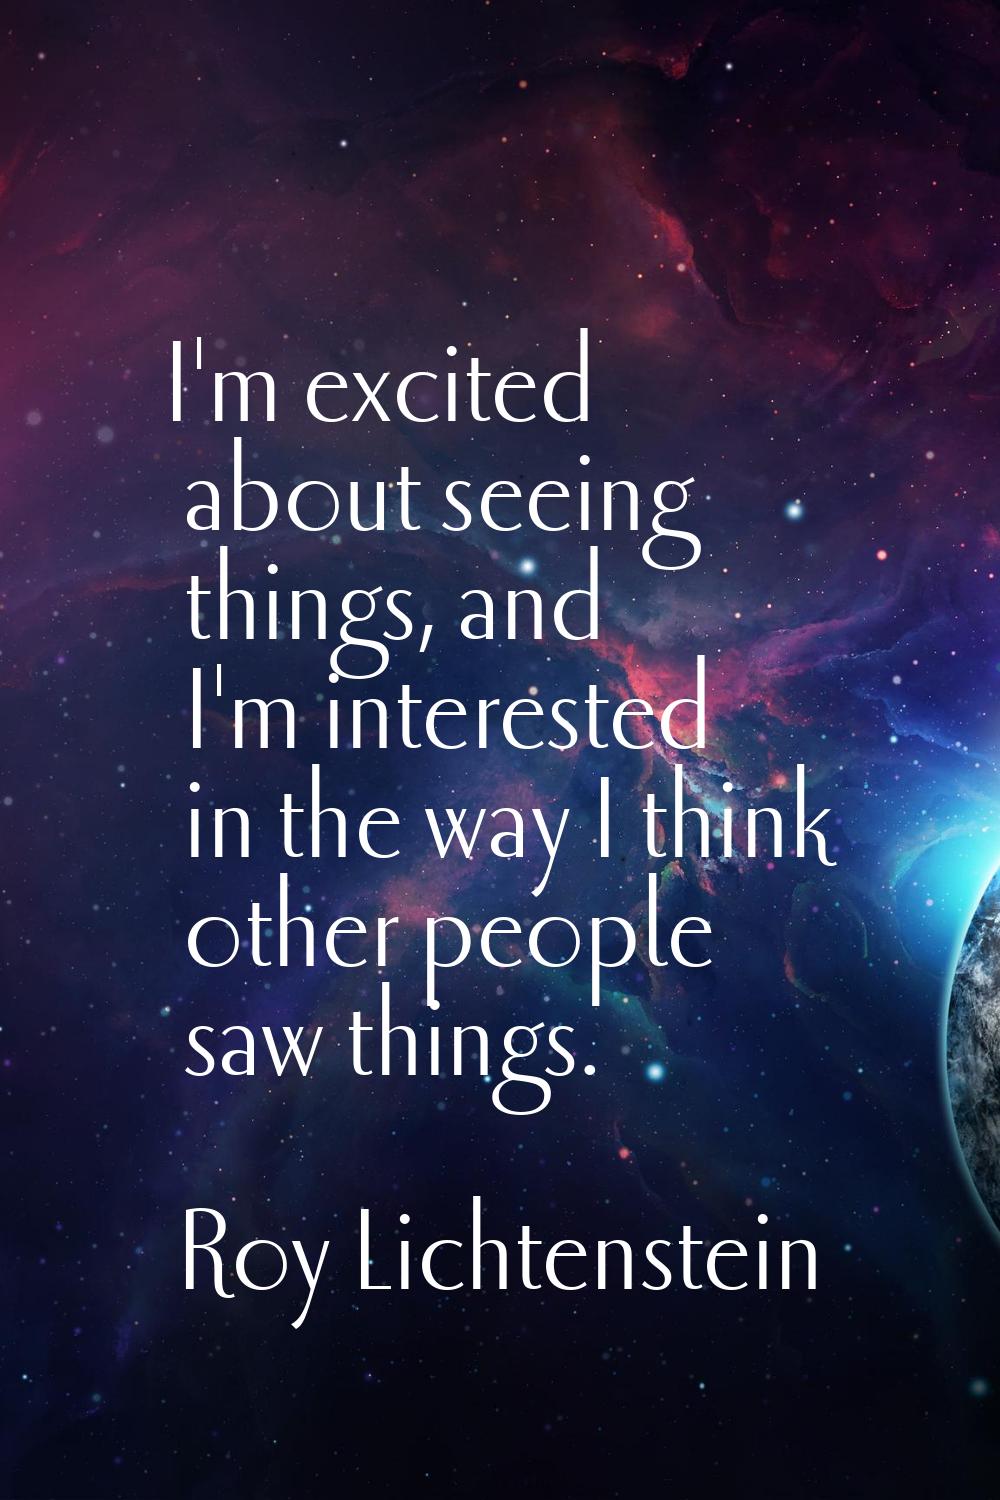 I'm excited about seeing things, and I'm interested in the way I think other people saw things.